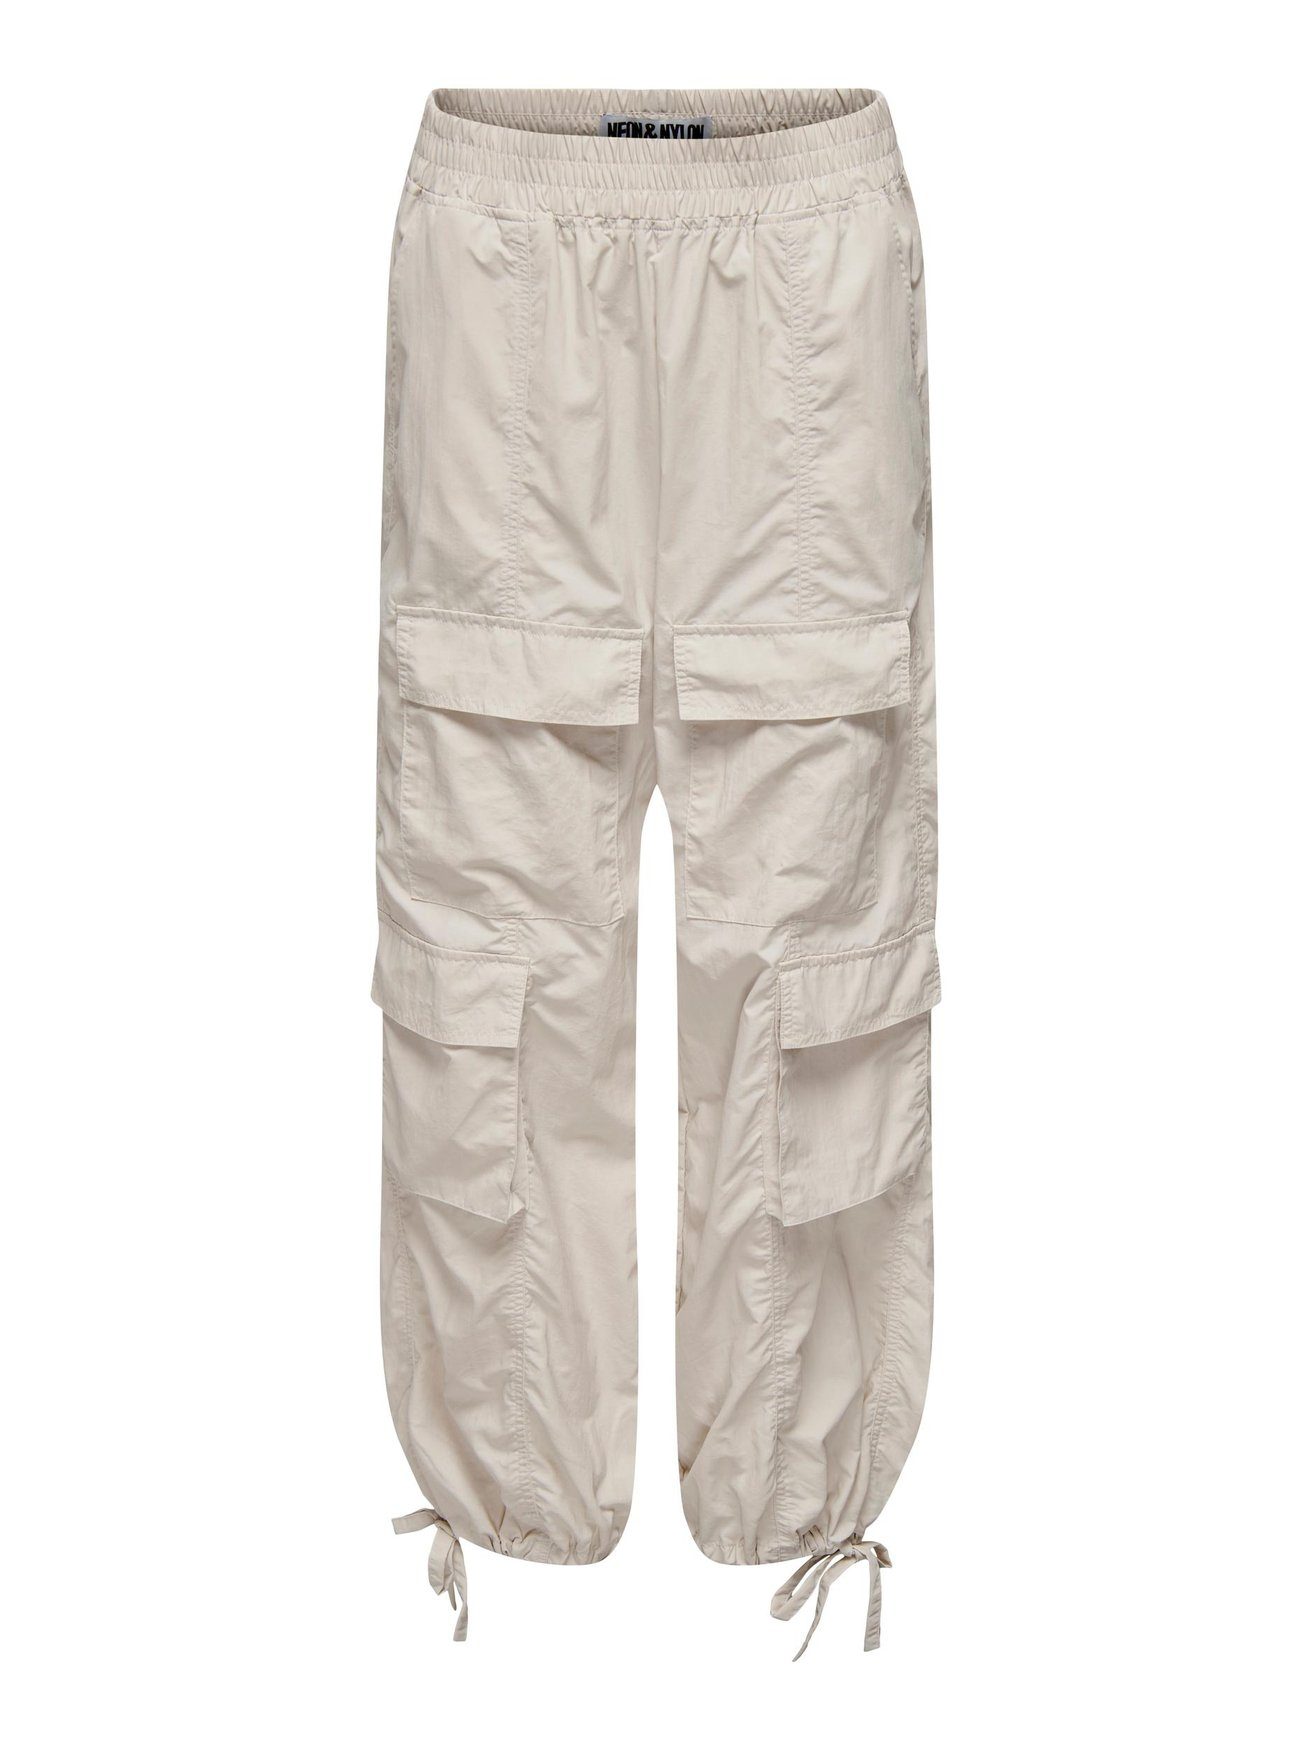 Stoffhose Stretch ONLY 5211 Pants Cargo Stoffhose in ONLENIELCA Jogger Beige